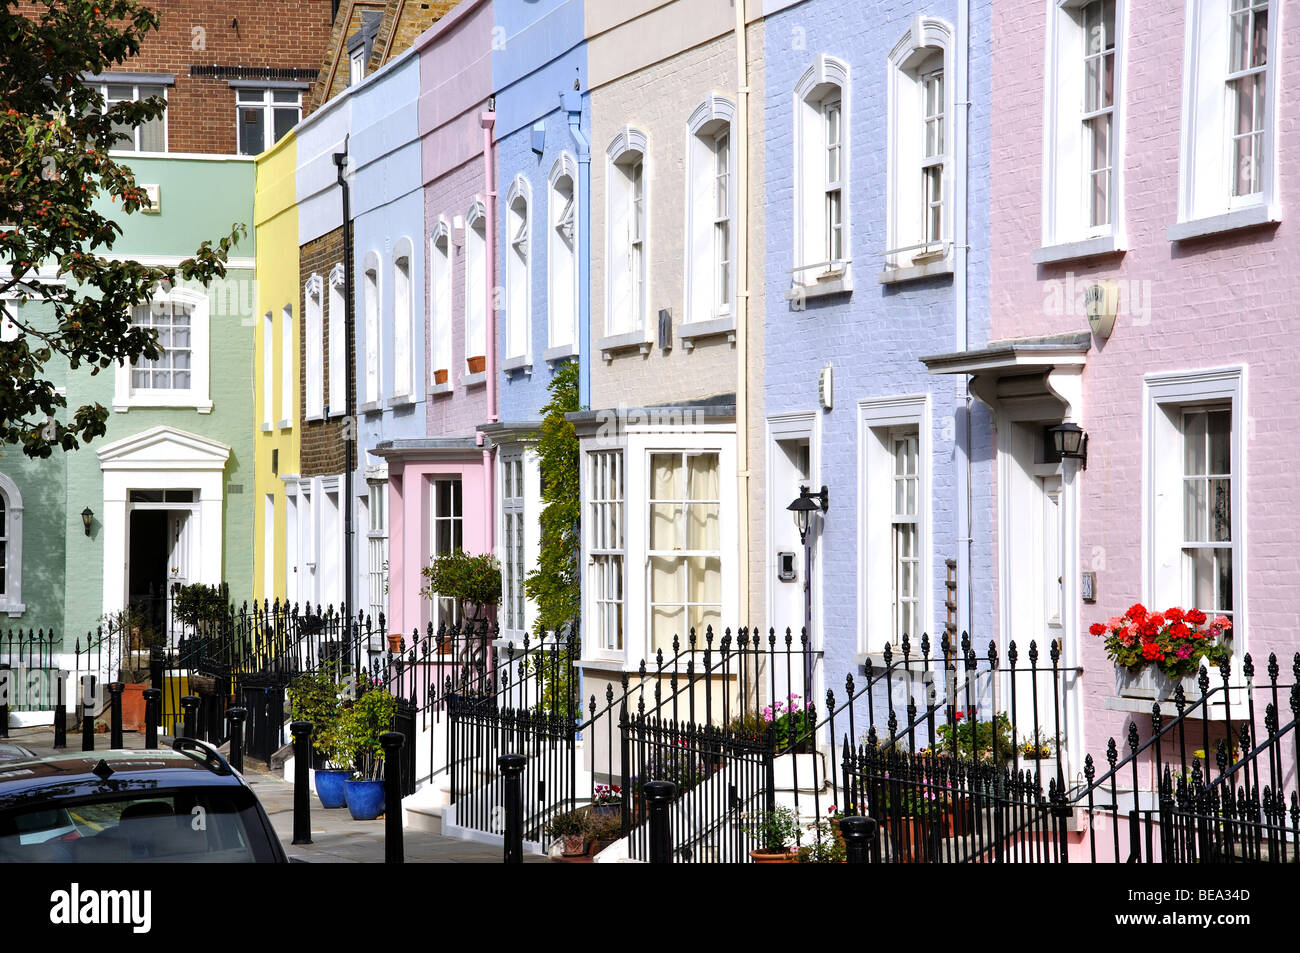 Colourful terraced houses, Bywater Street, Chelsea, Royal Borough of Kensington and Chelsea, London, England, United Kingdom Stock Photo